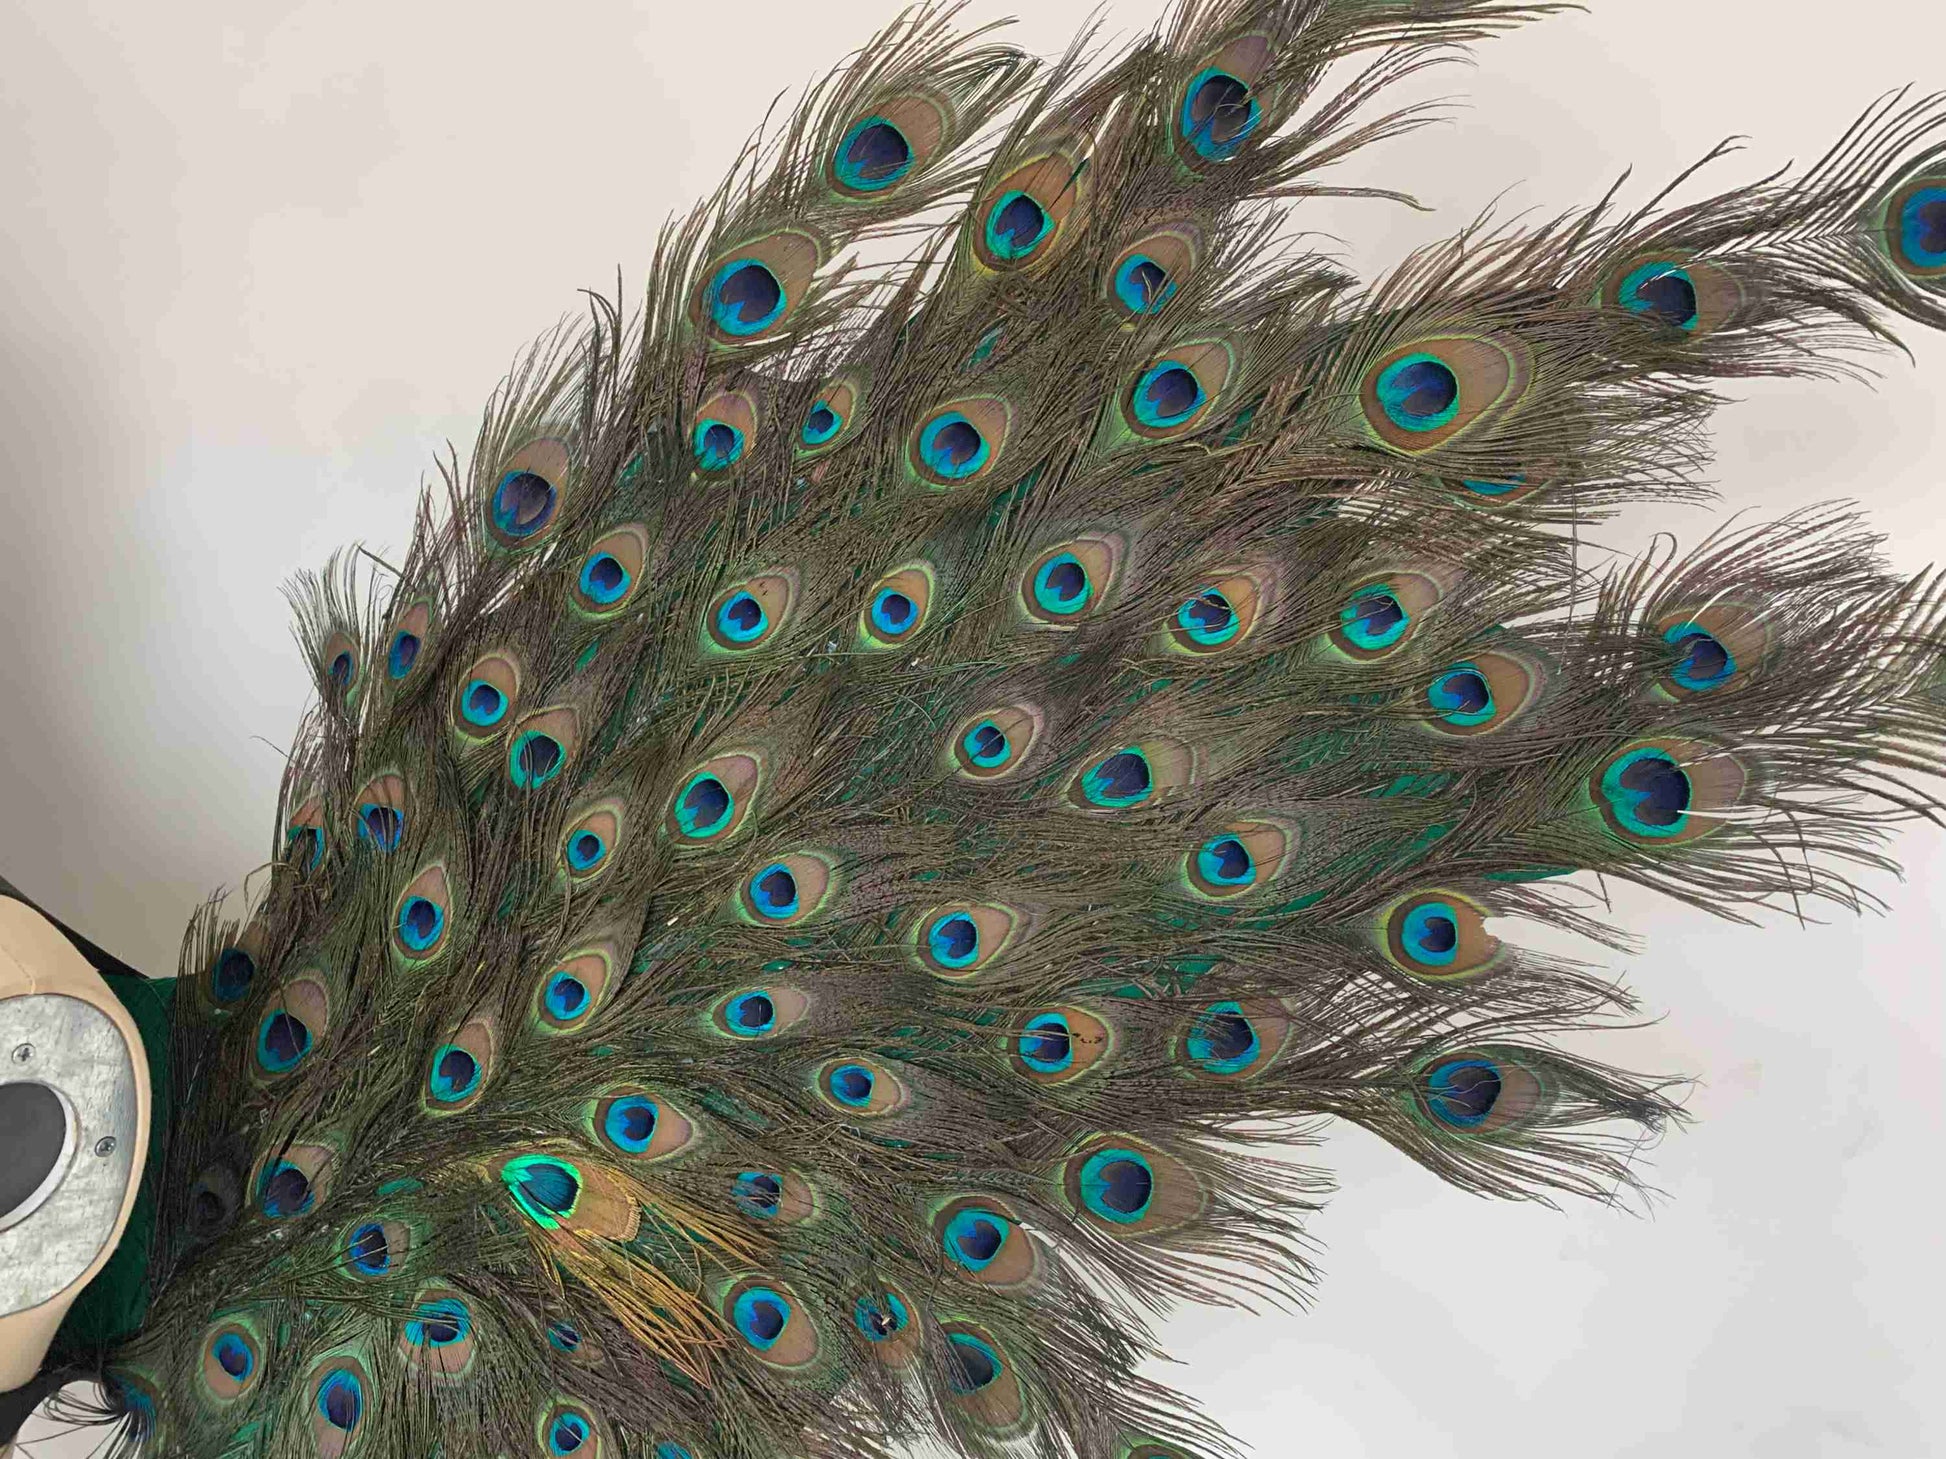 Our angel wings close view. Made from peacock feathers. Wings for peacock costume or fantasy costume. Suitable for photoshoots.